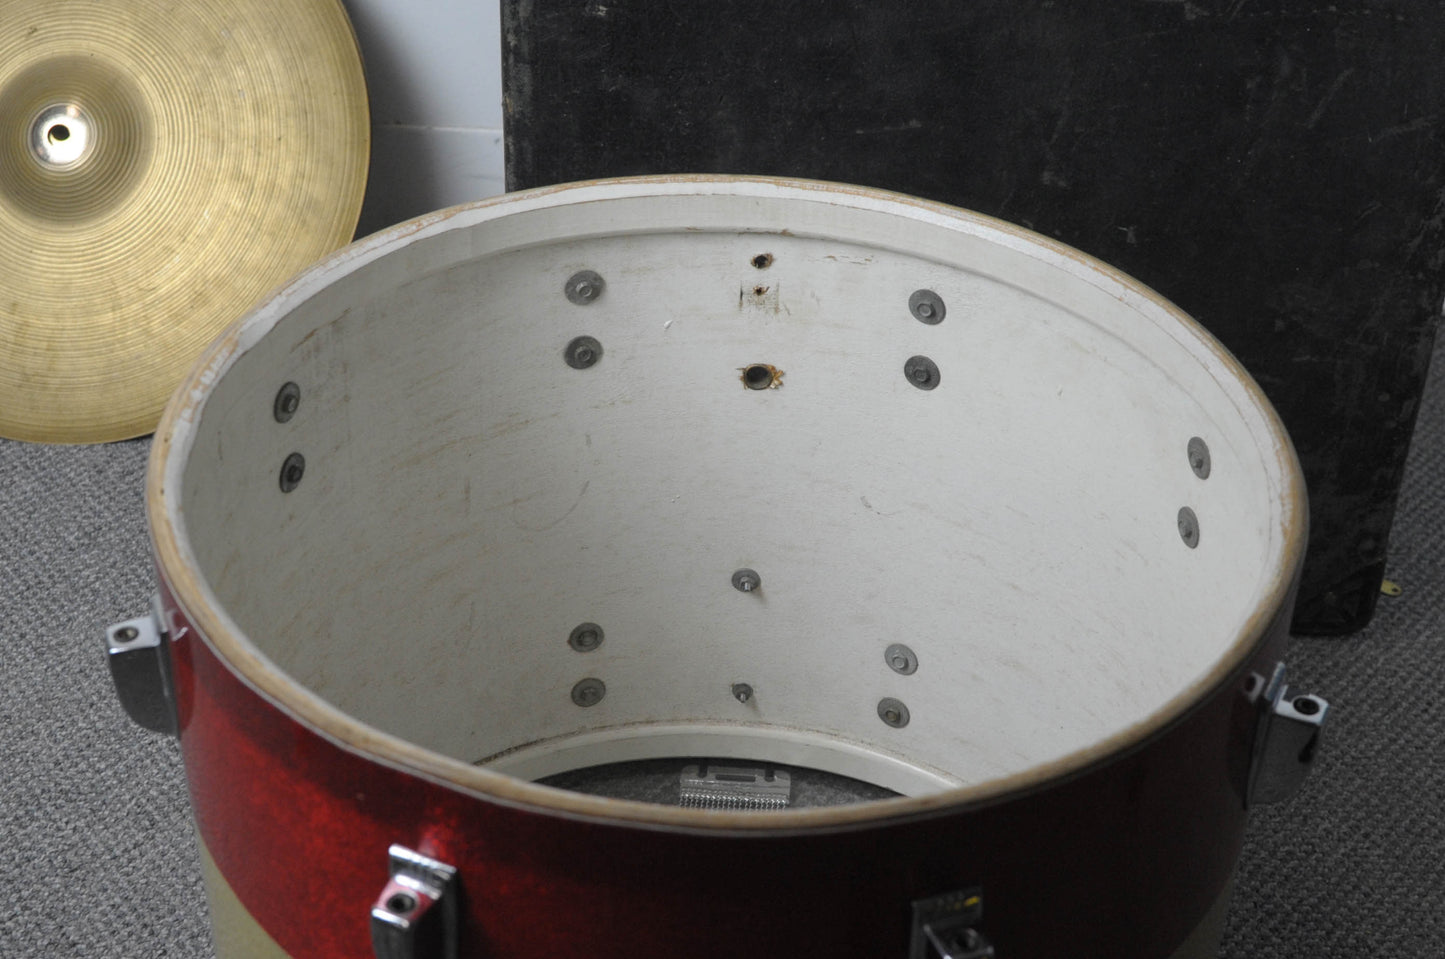 1960s Ludwig "Tri-Band" Super-Classic 12x15" Parade Snare Drum